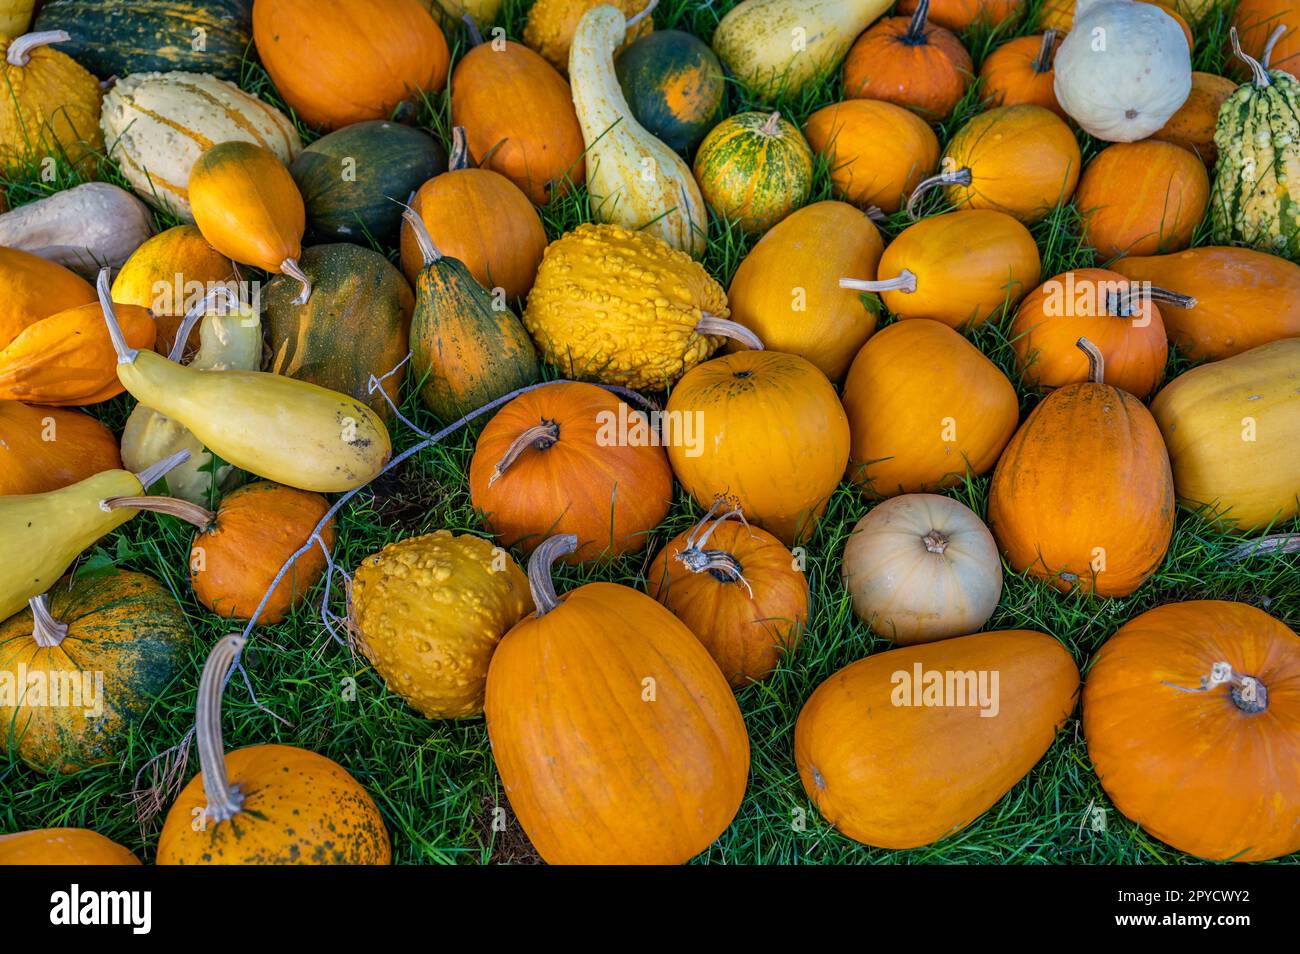 Variation of different orange, yellow and green colored, round and egg shaped ornamental gourds pumpkin lying on a meadow, no people Stock Photo